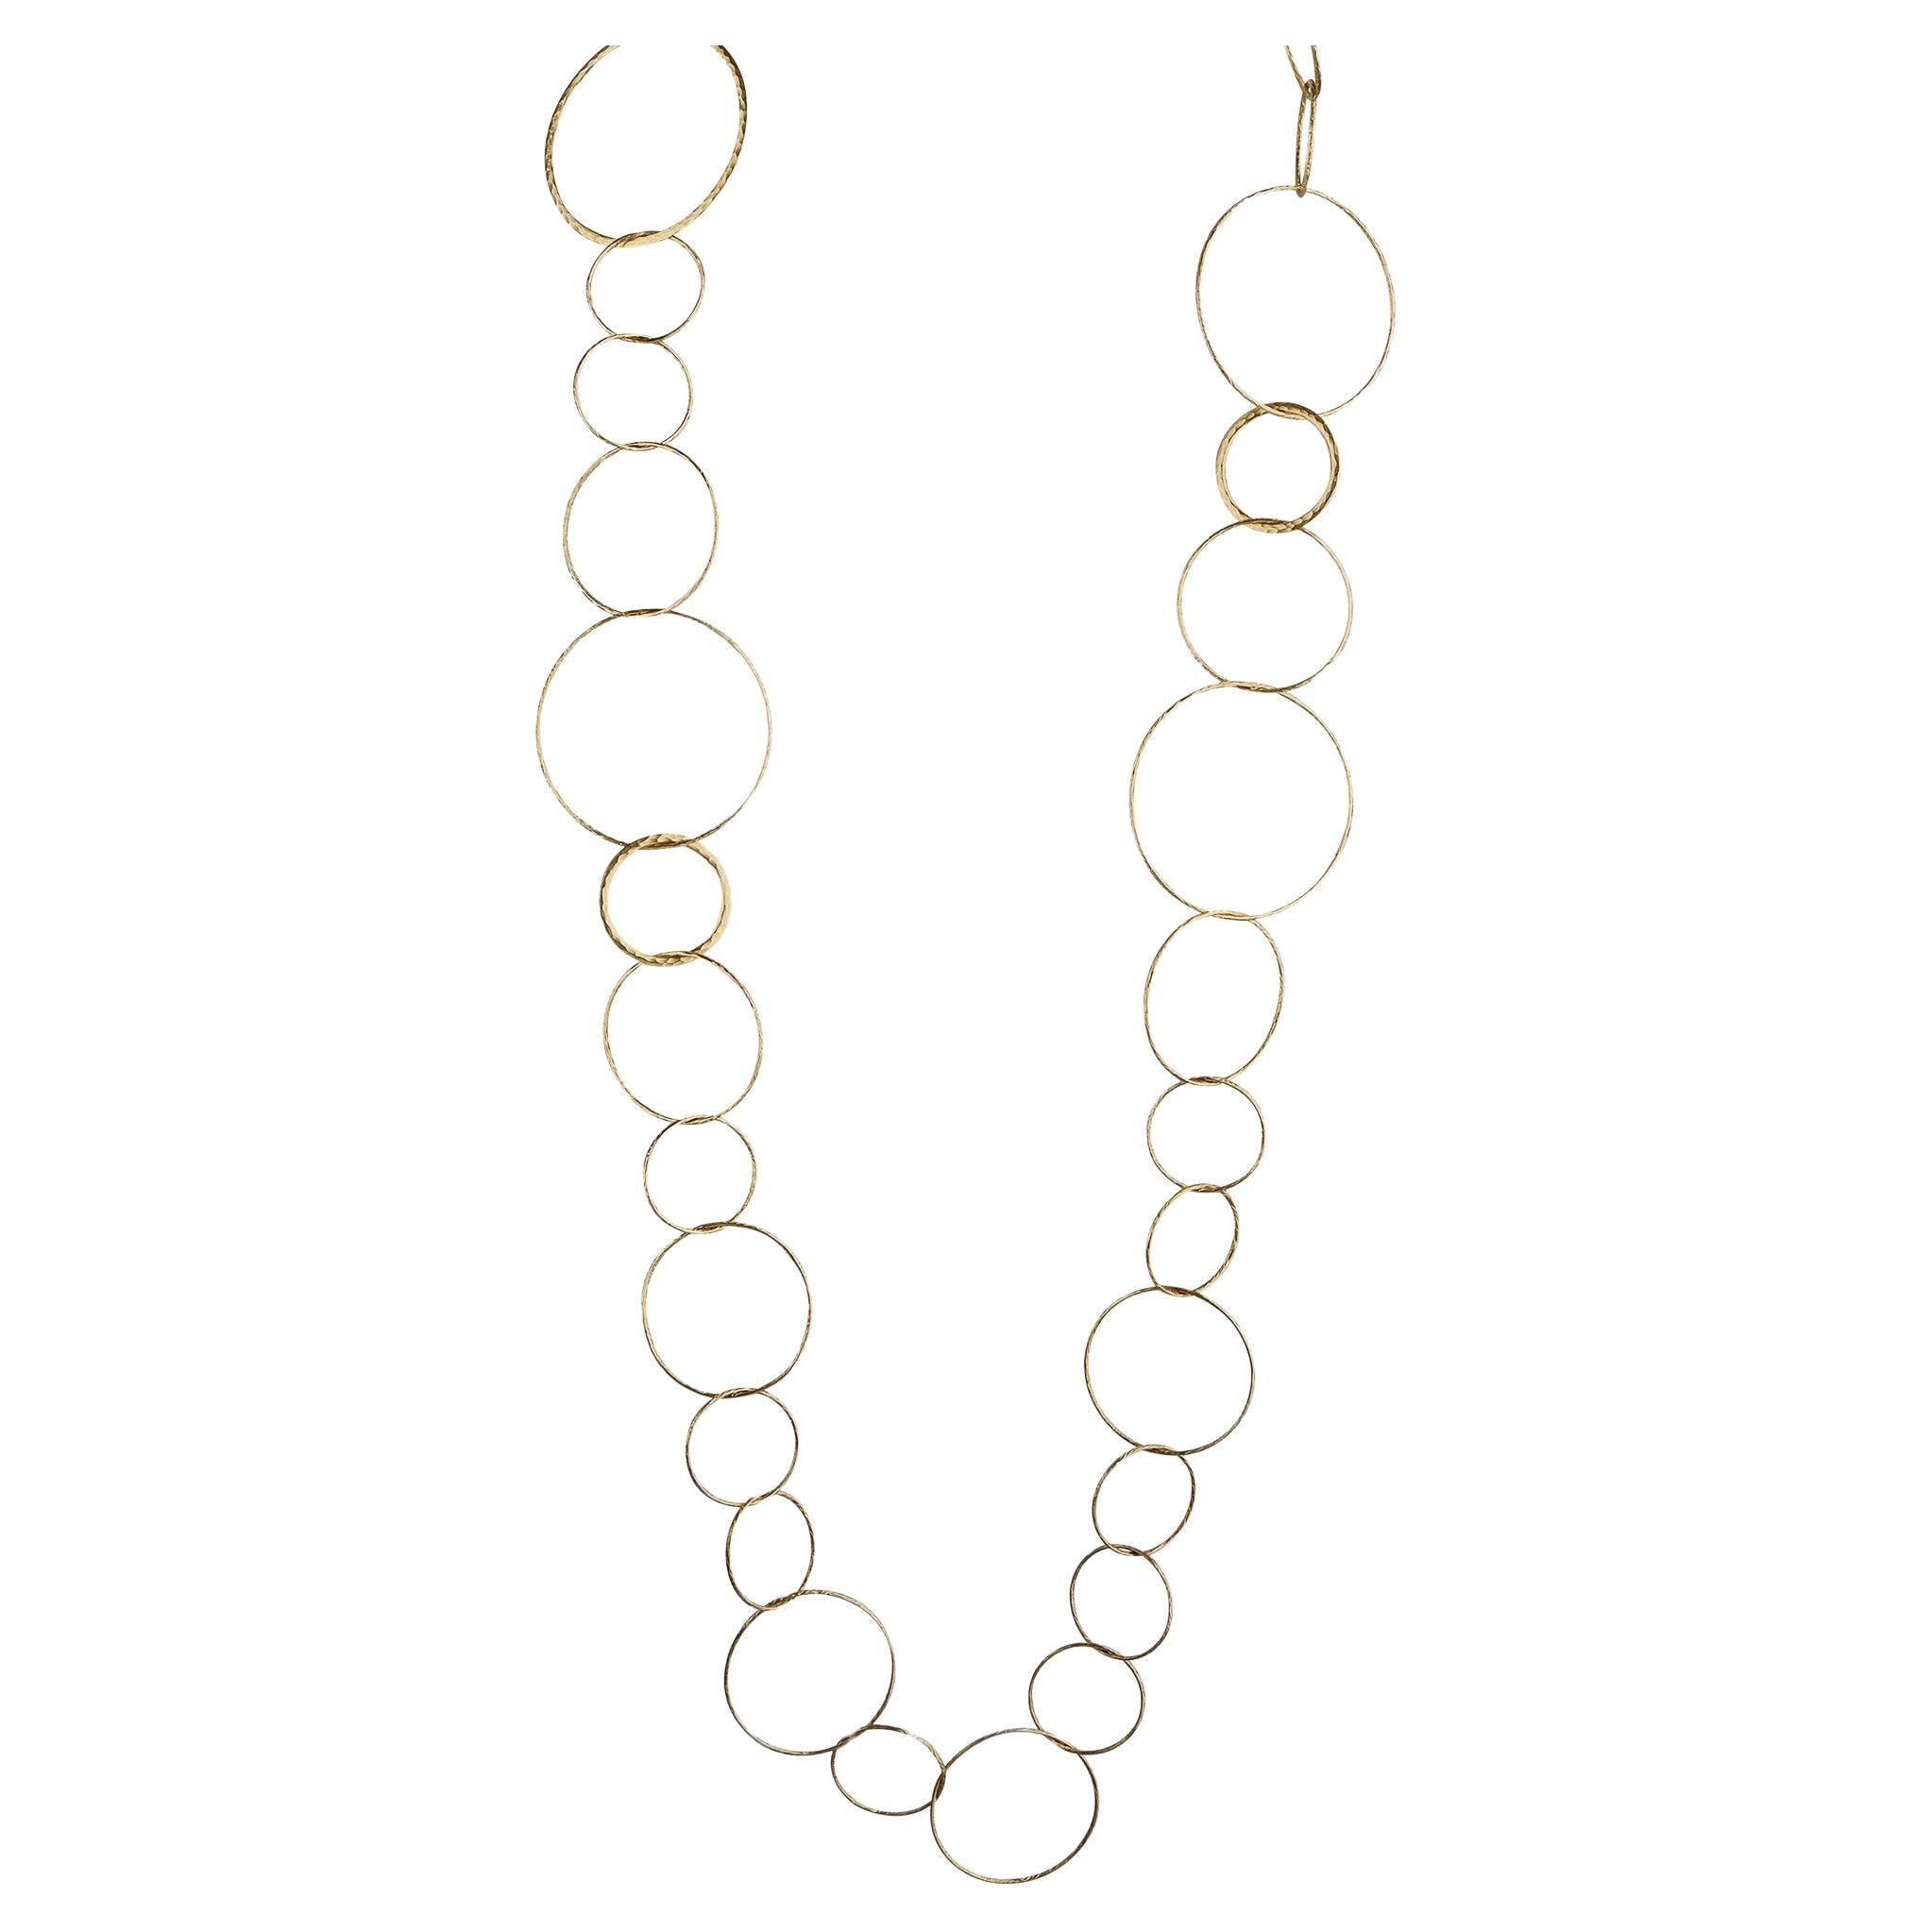 Paloma Picasso for Tiffany & Co. 18K Golding Co. Hammered "Circles" Necklace